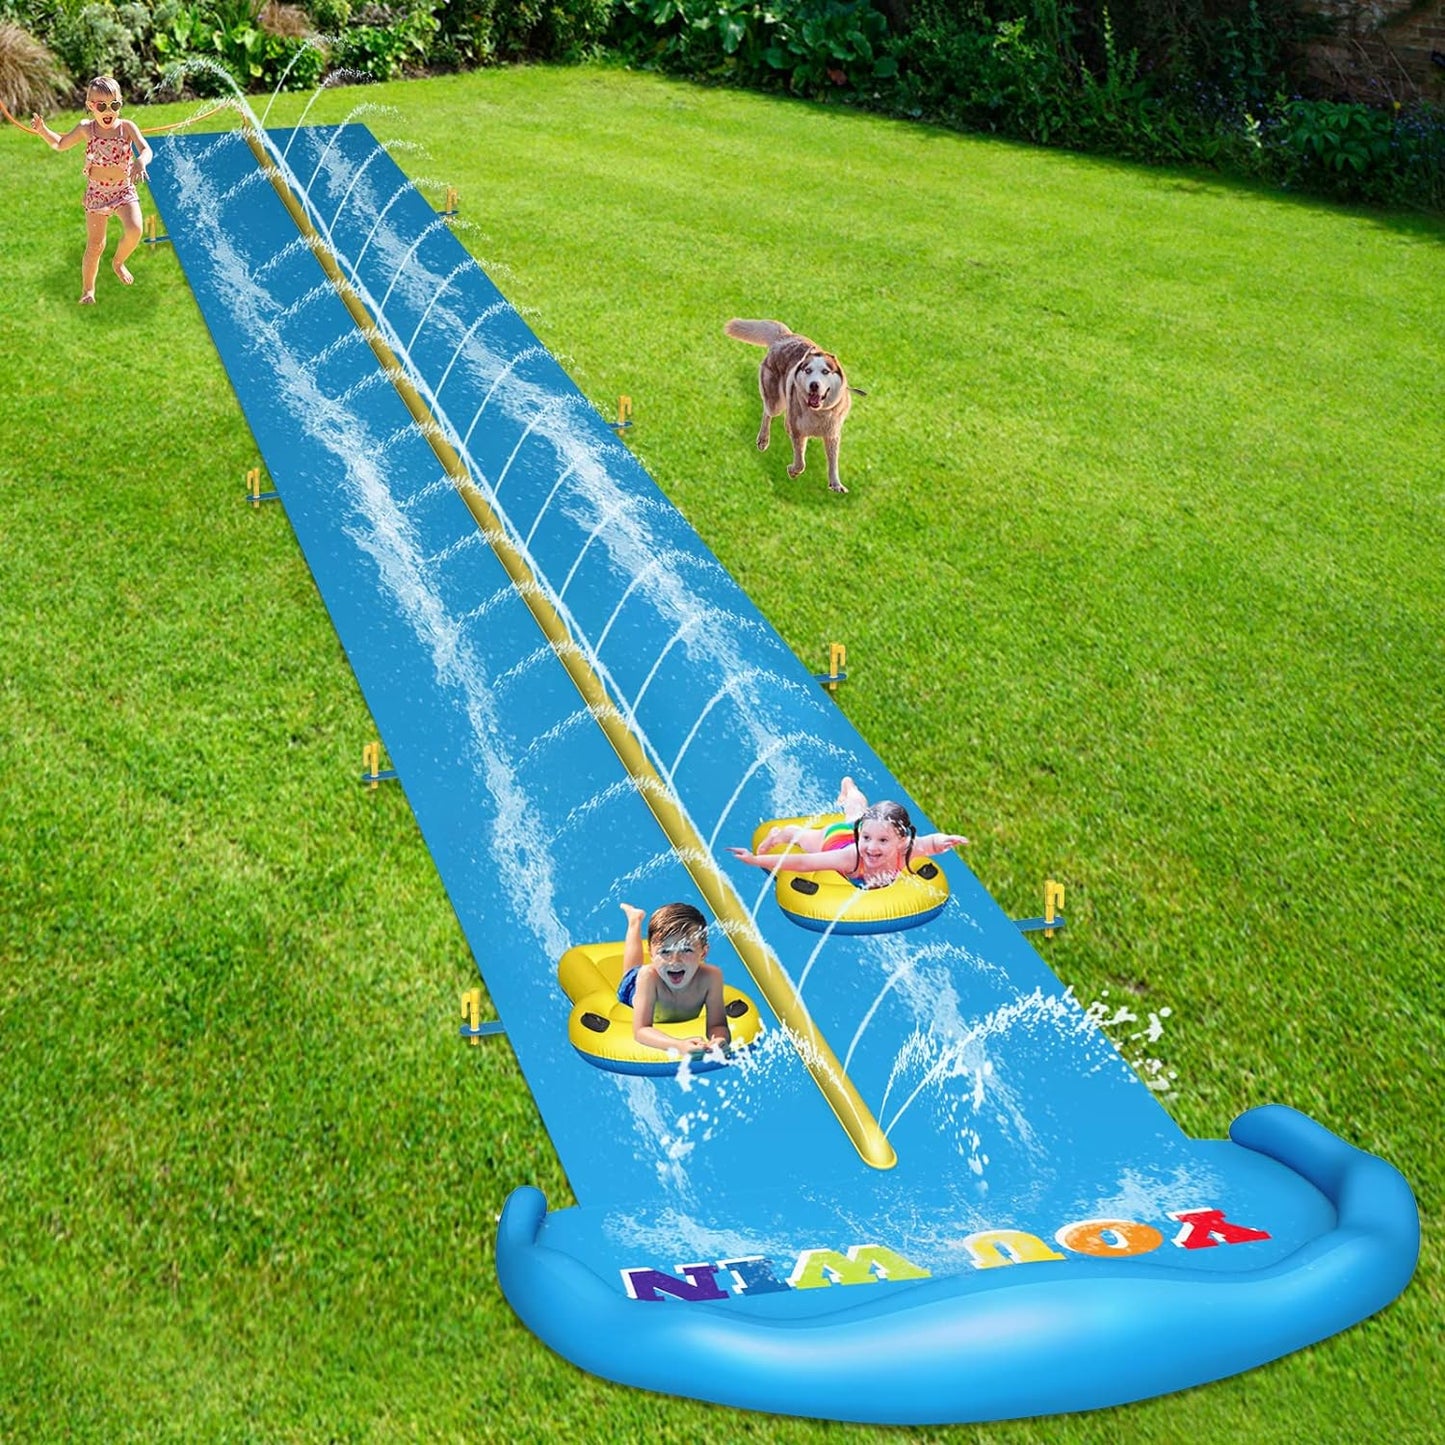 Water Slide, 32.8Ft Inflatable Splash Water Slip with 2 Racing Lanes and 2 Body Boards for Kids Boys Girls Adults, Water Slide Outdoor Water Toys for Backyard Garden